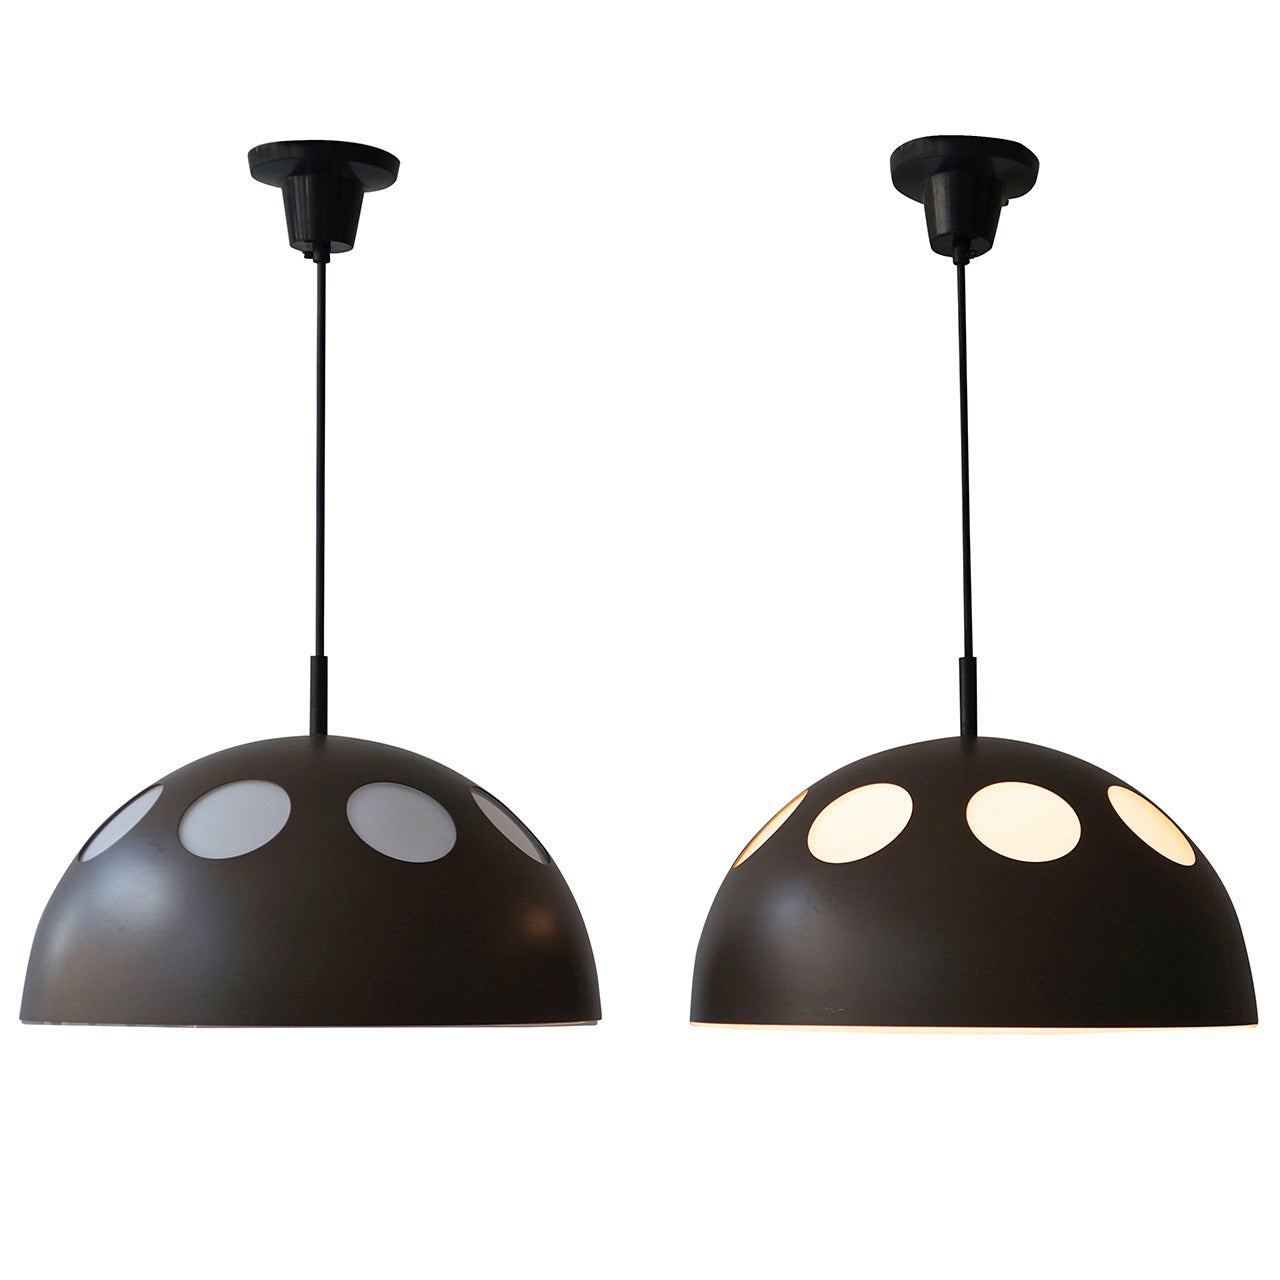 One of Two Pendant Lamps by RAAK For Sale